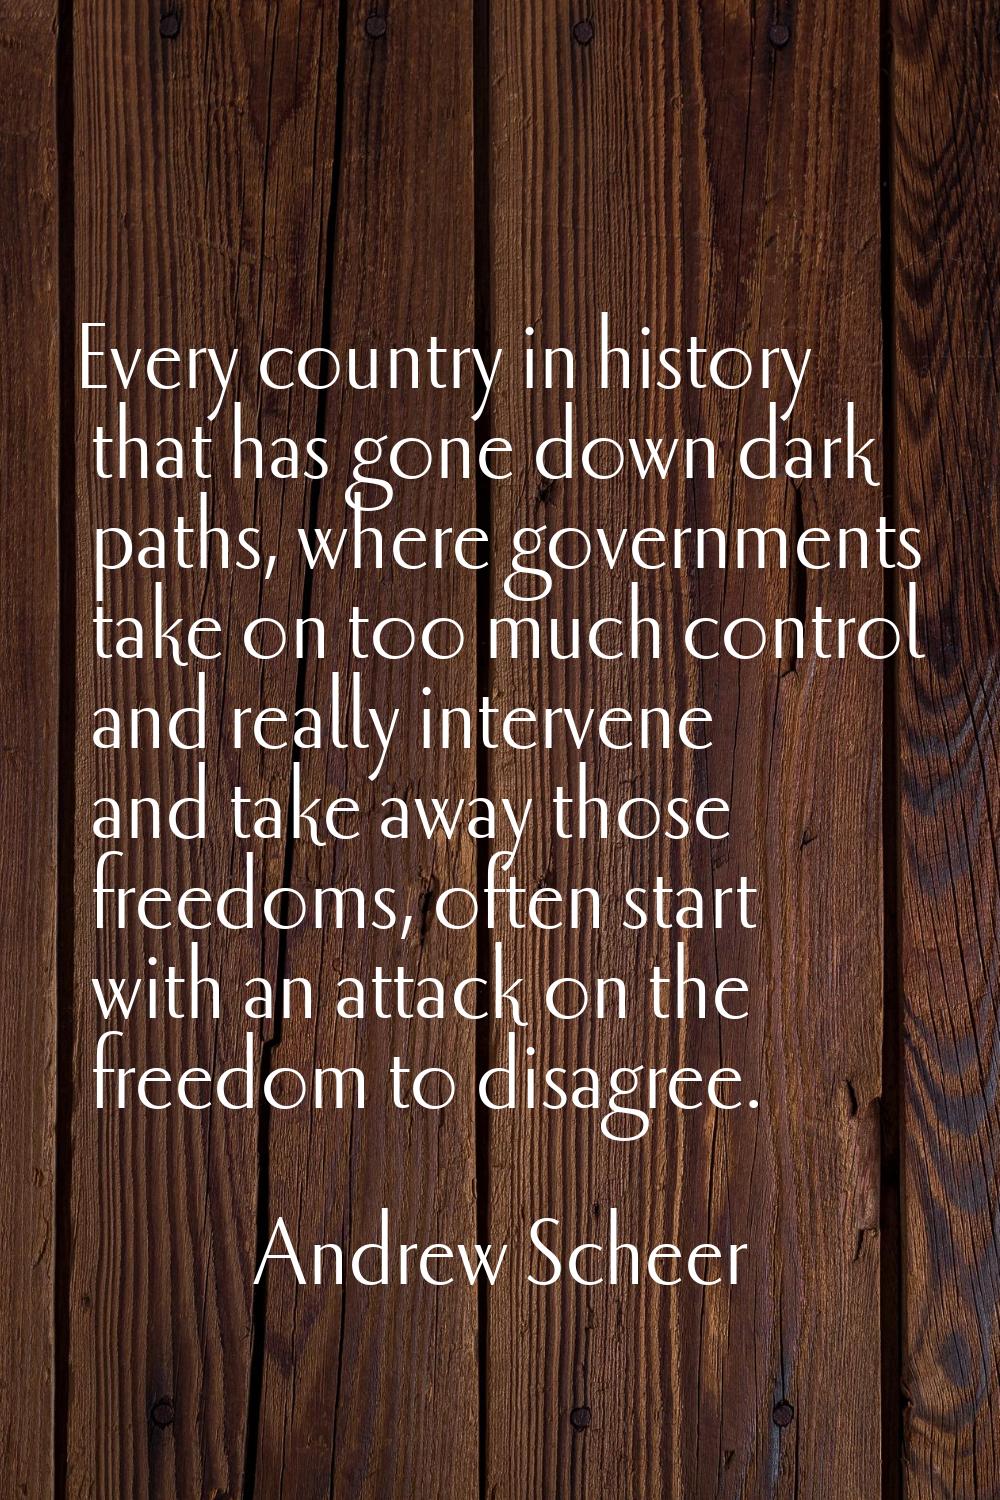 Every country in history that has gone down dark paths, where governments take on too much control 